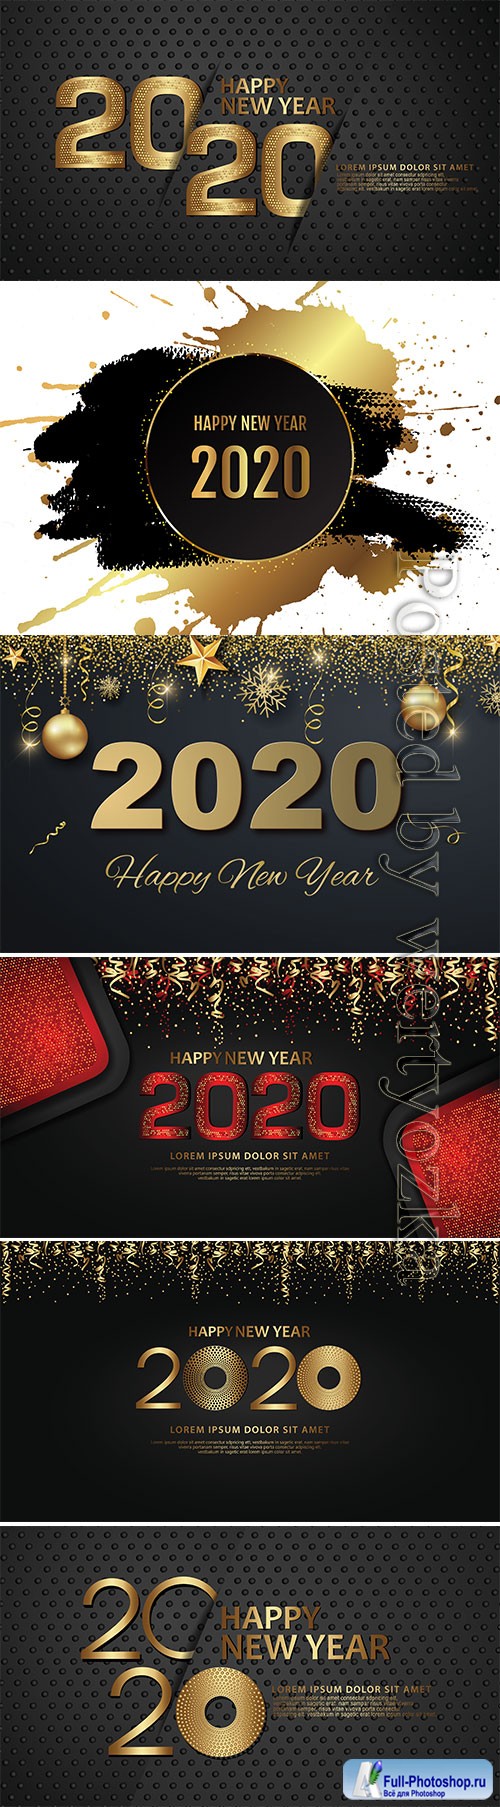 Gold Happy New Year vector background with snowflake